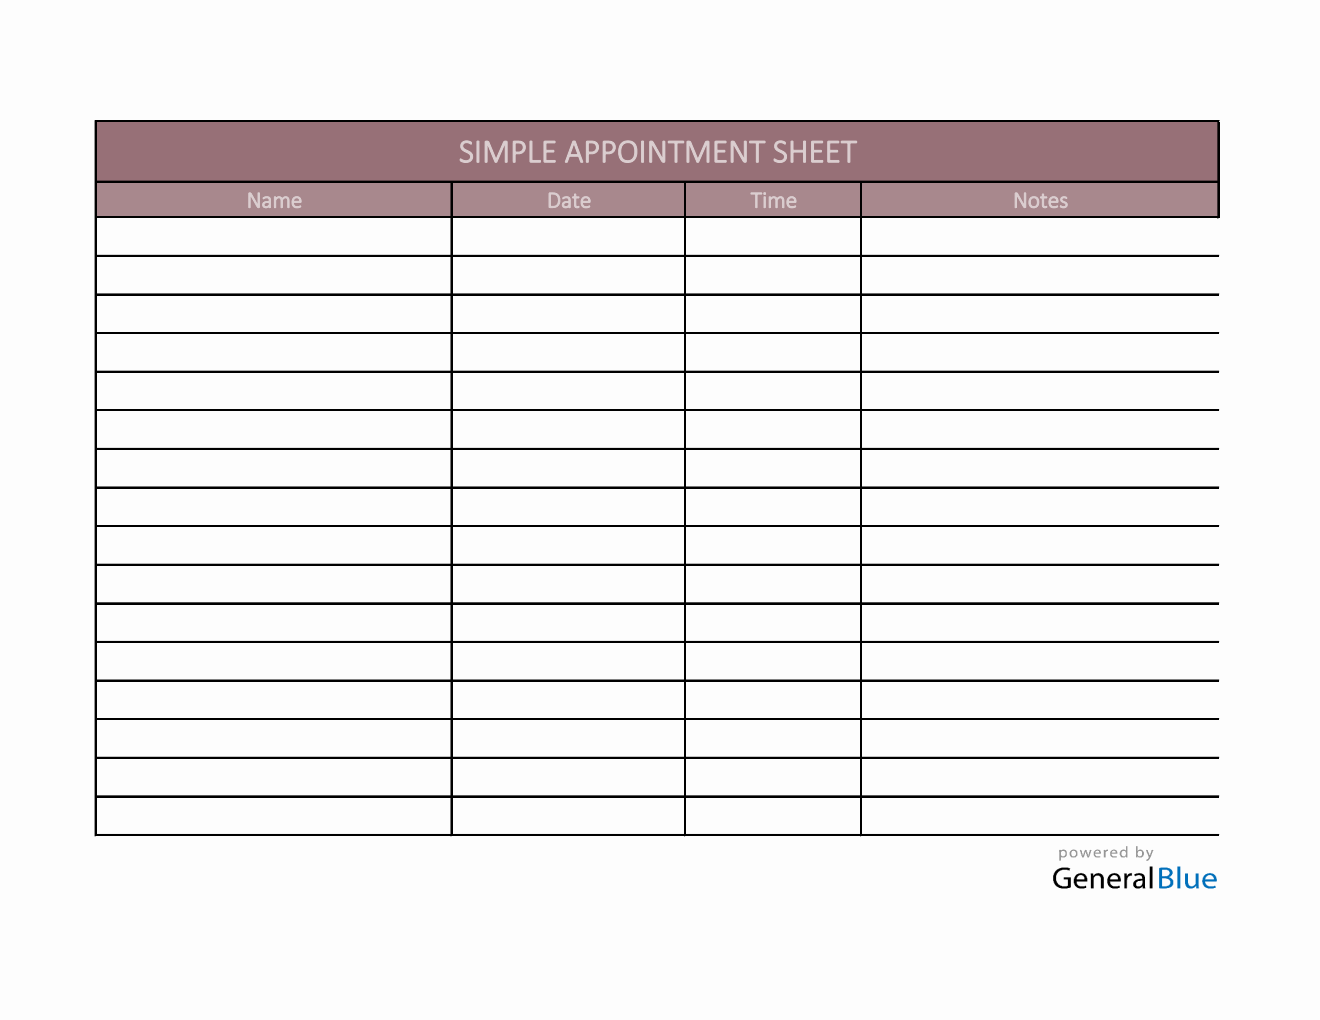 Simple Appointment Sheet Template in Excel (Basic)